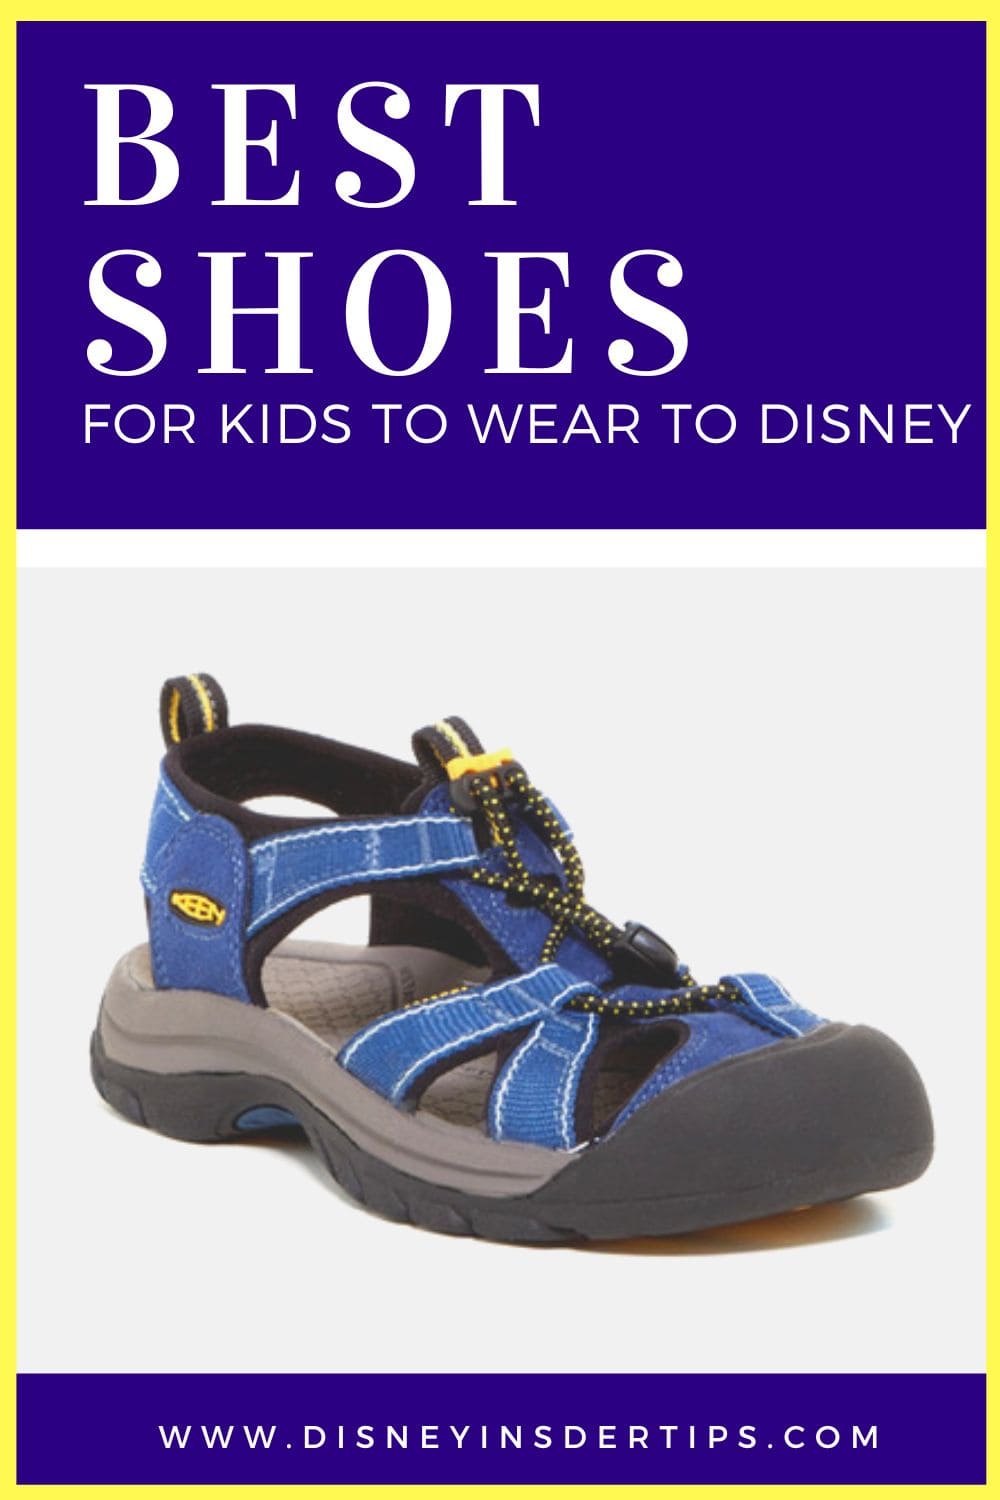 Best Shoes for Kids to Wear to Disney